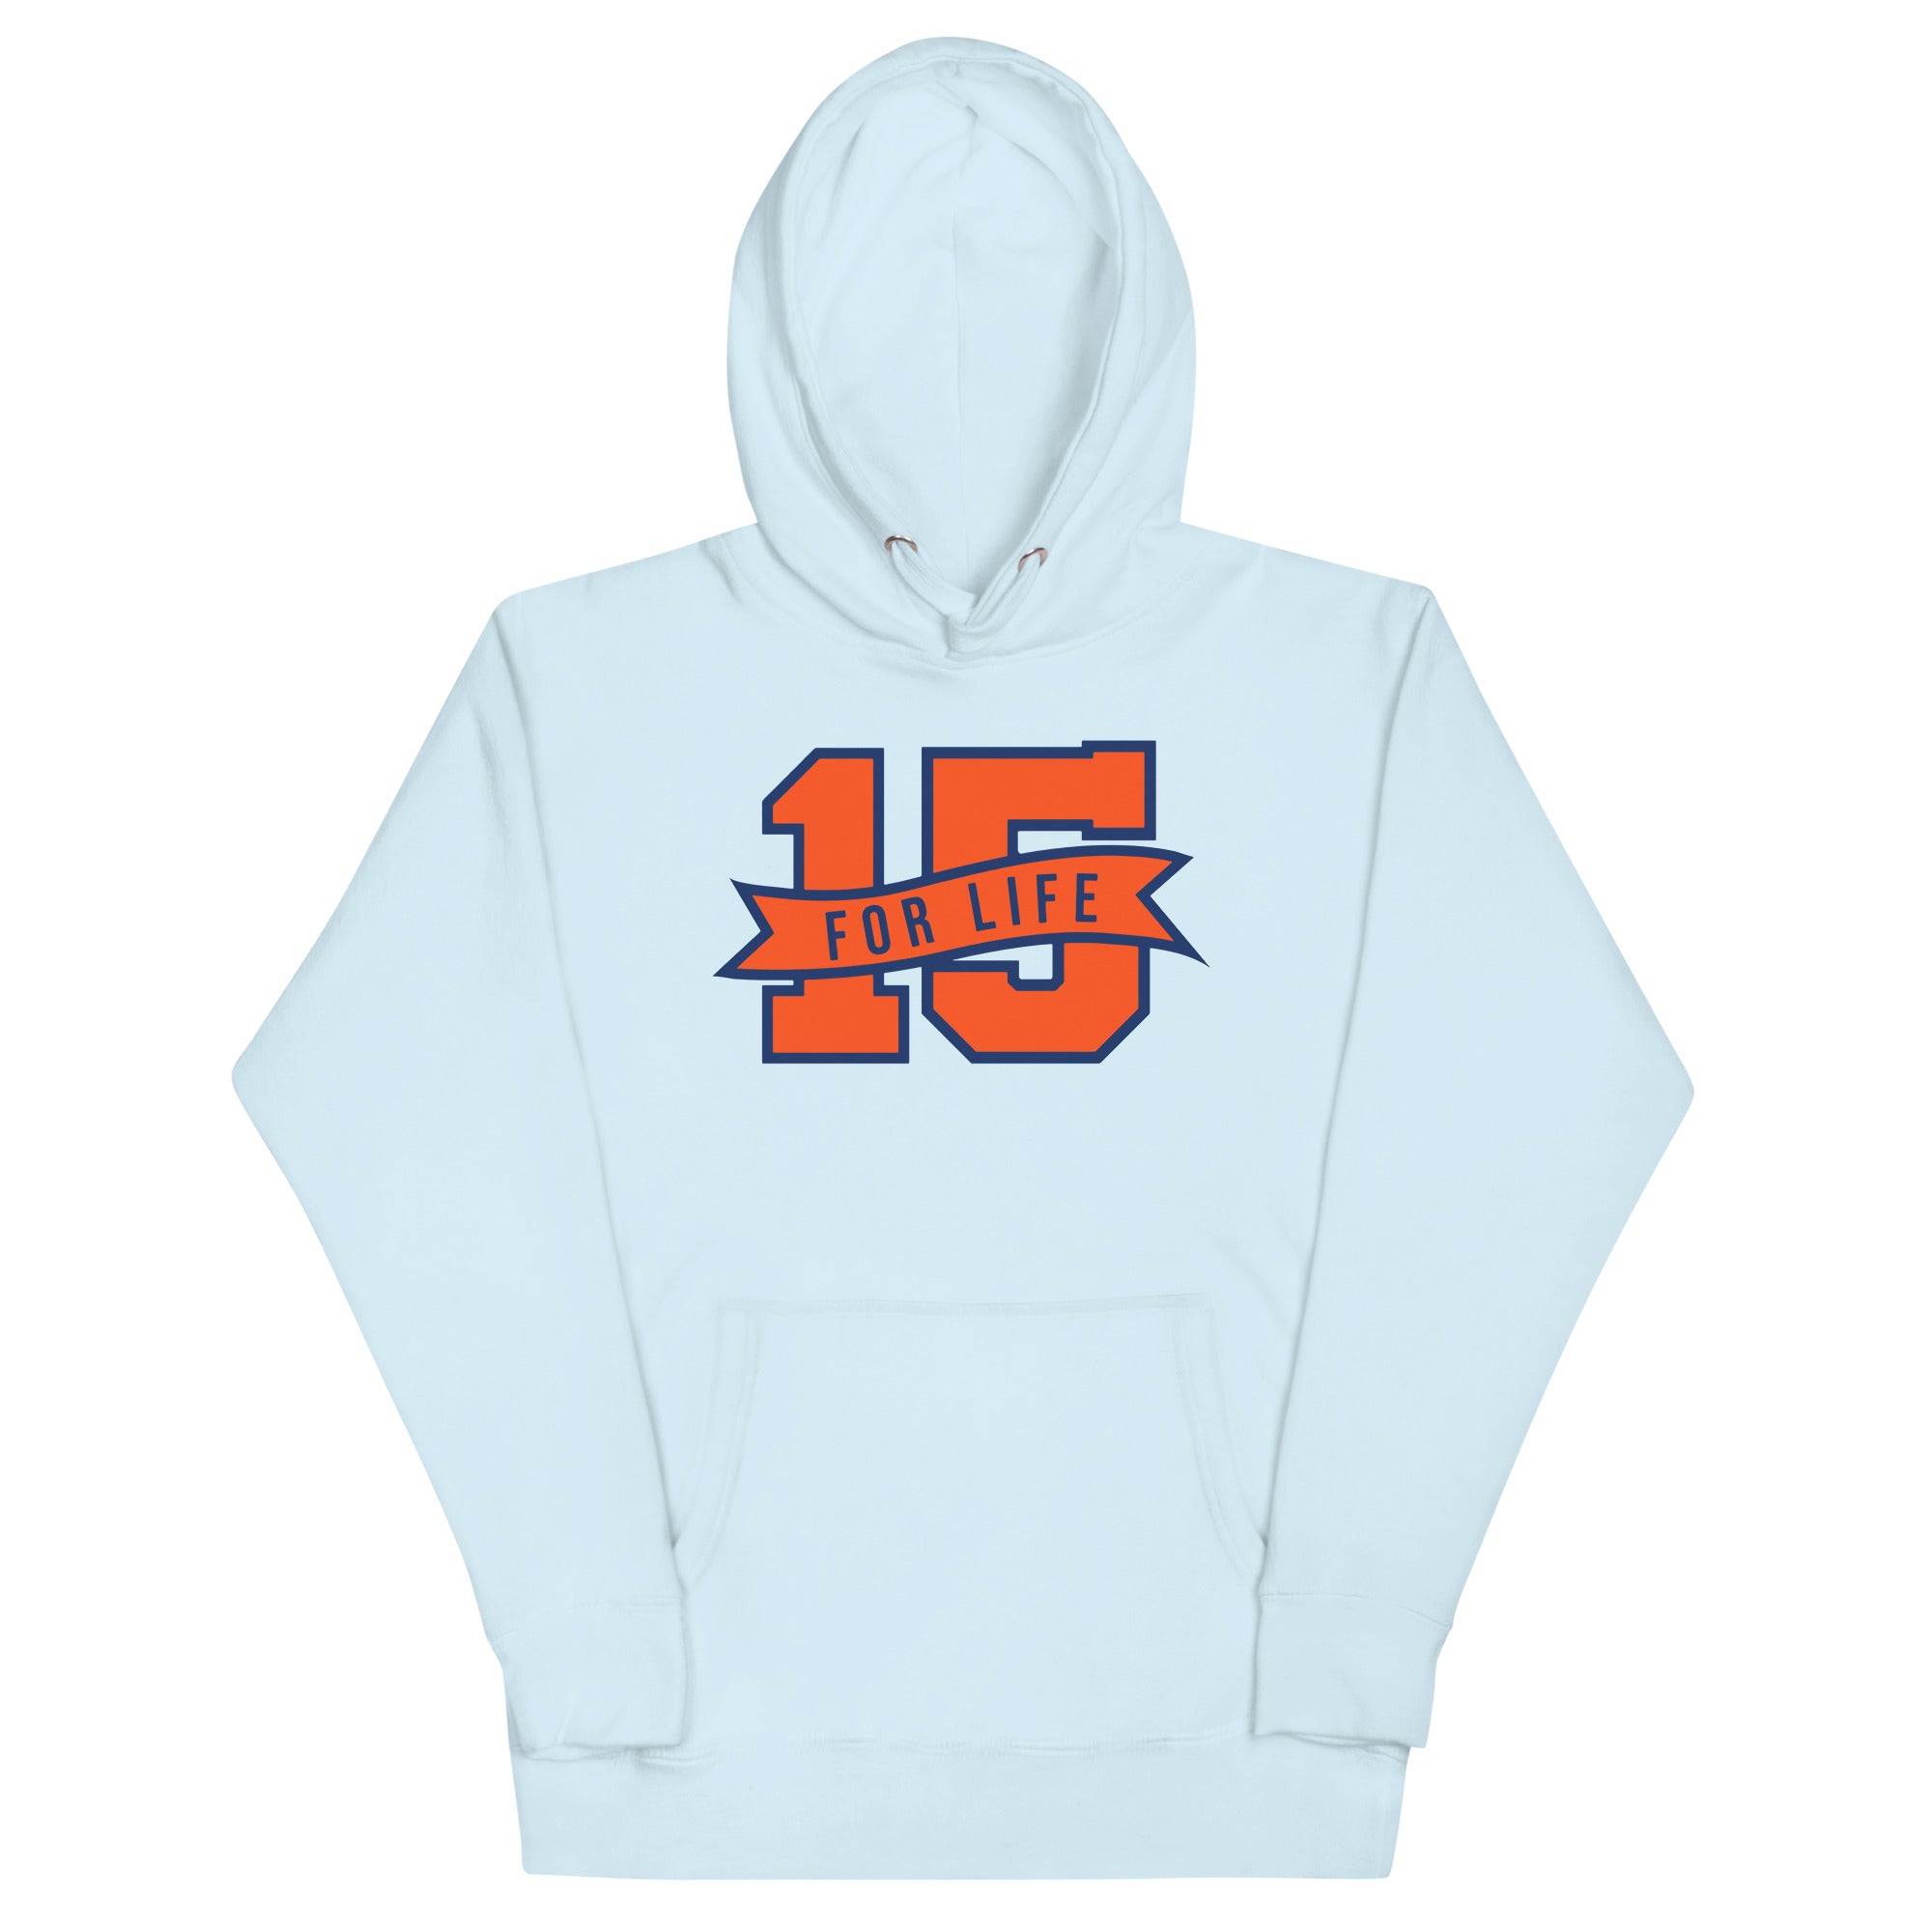 15 For Life Unisex Hoodie